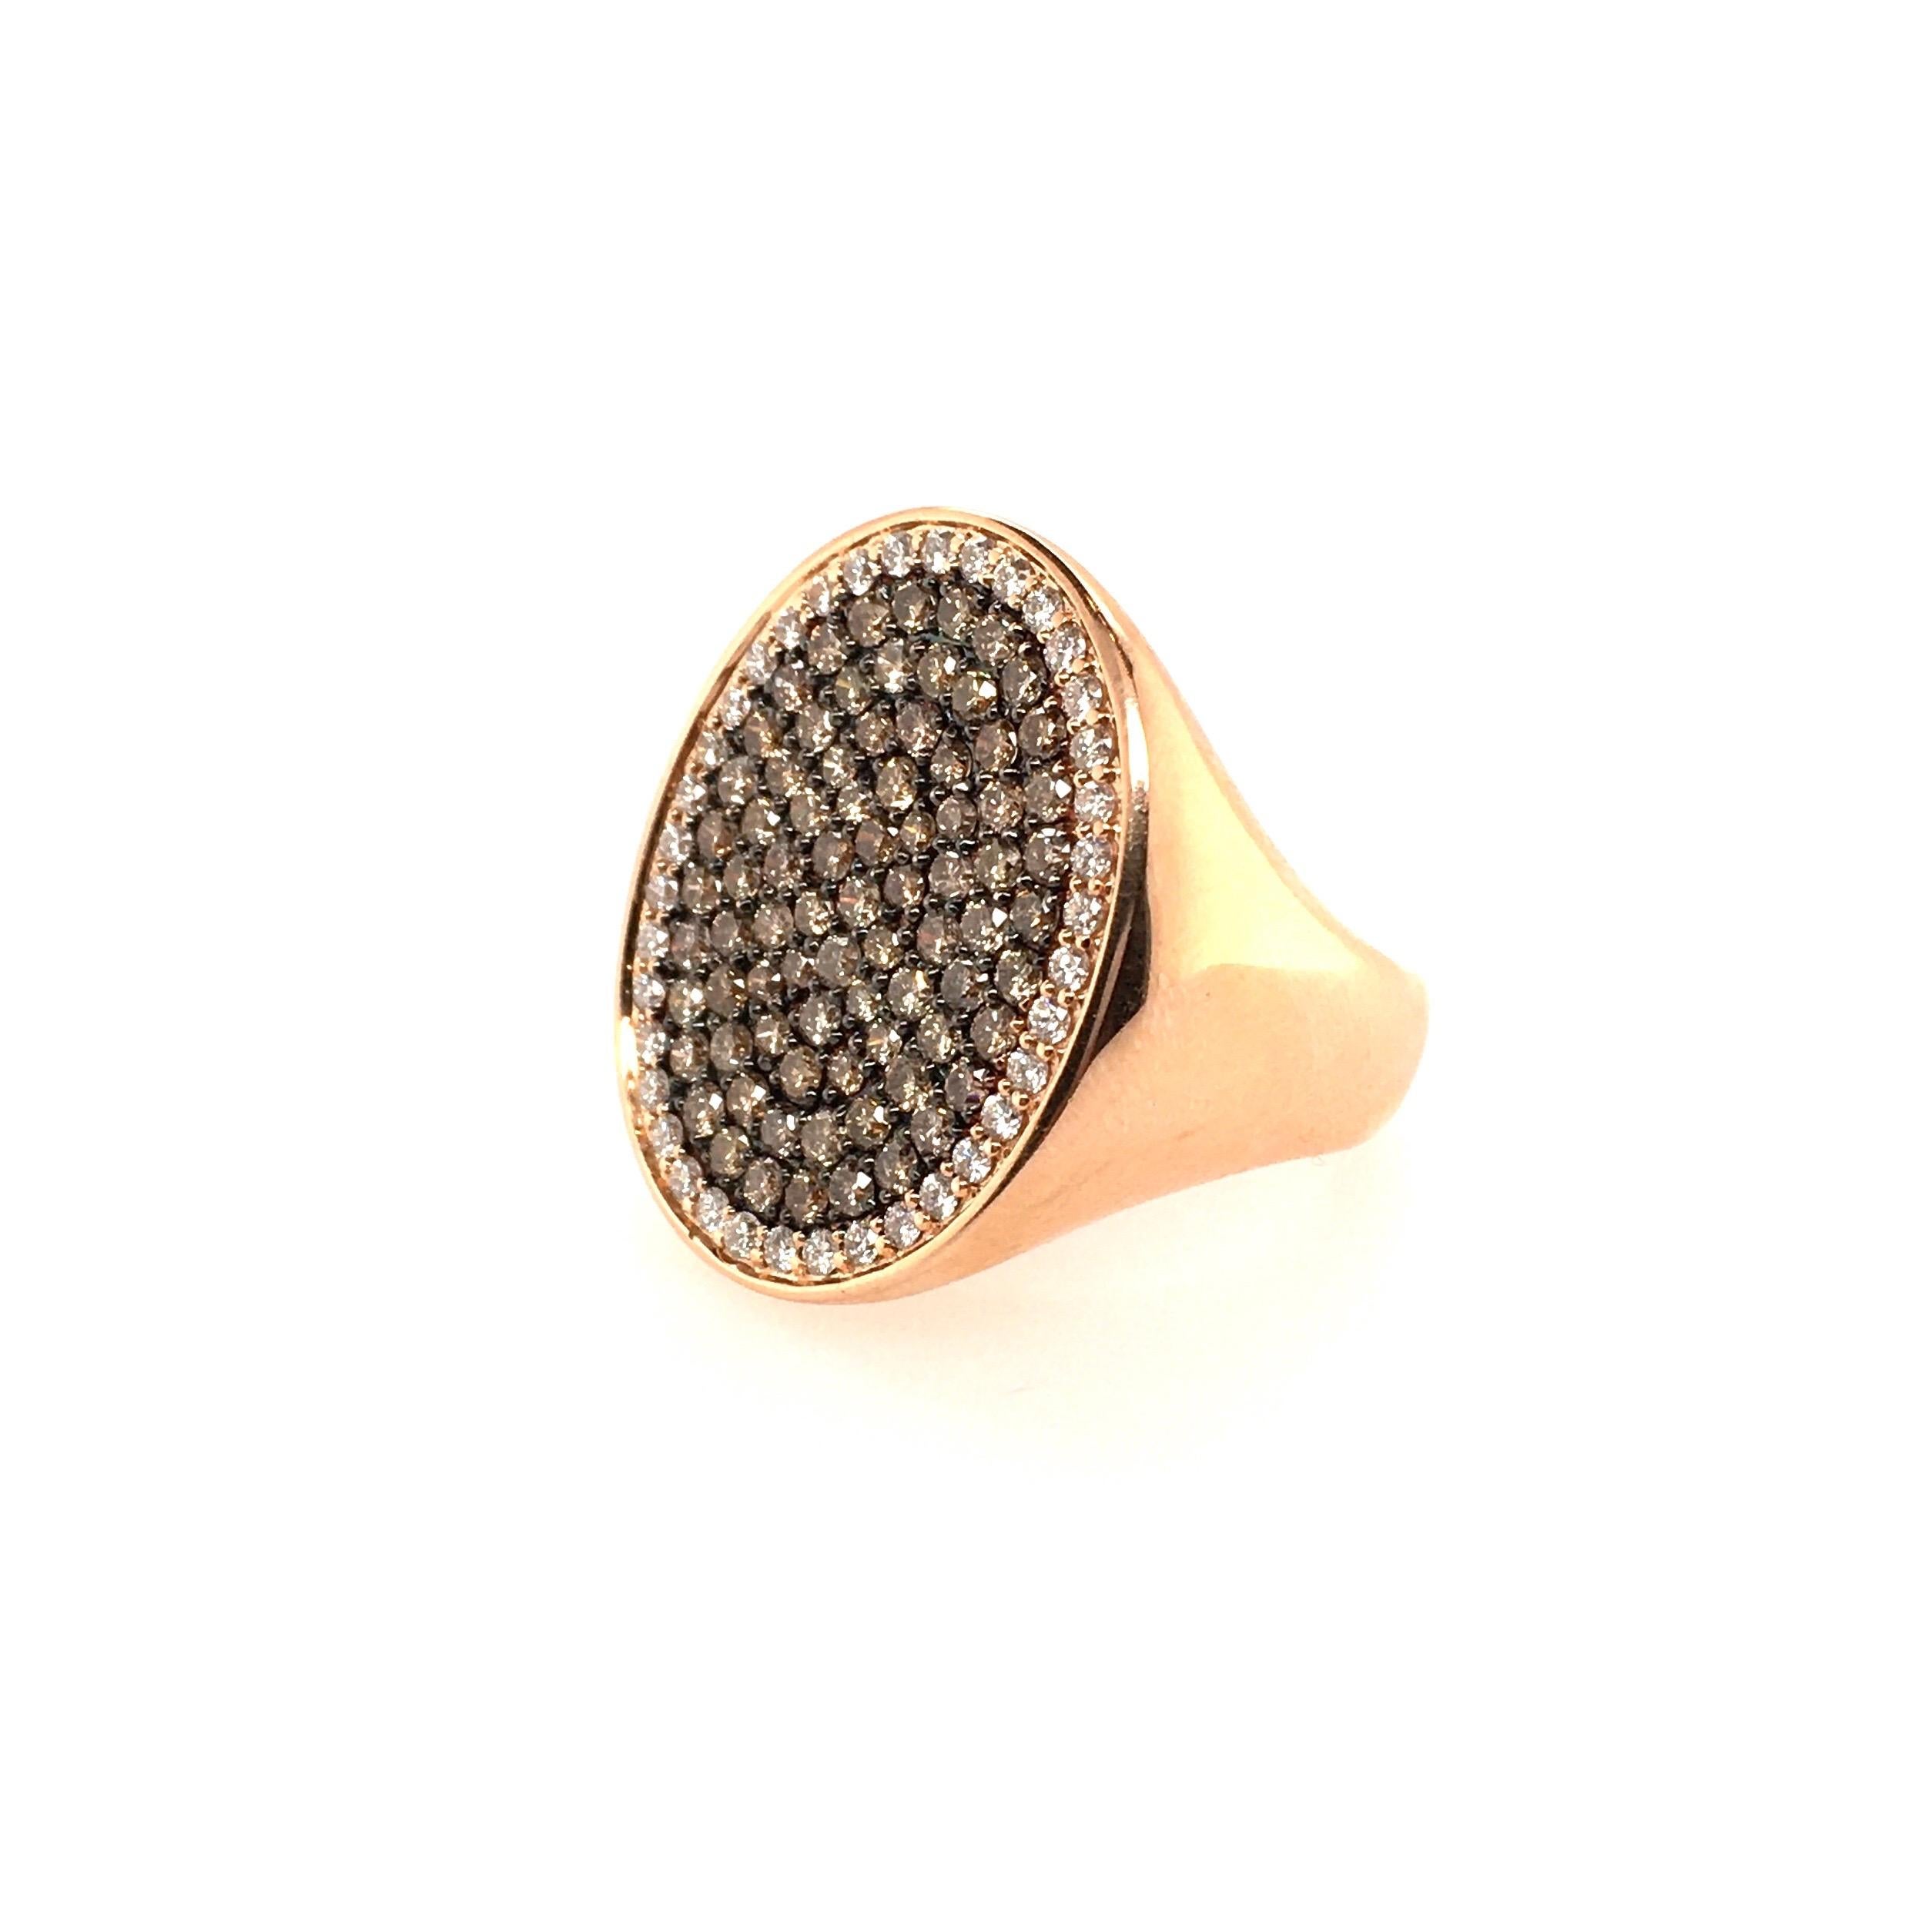 An 18 karat rose gold, brown diamond and diamond ring. Set with an oval pave set brown diamond and diamond plaque, within a polished gold mounting. Brown diamonds weigh 1.68 carats, colorless diamonds weigh 0.48 carats, total diamond weight is 2.16